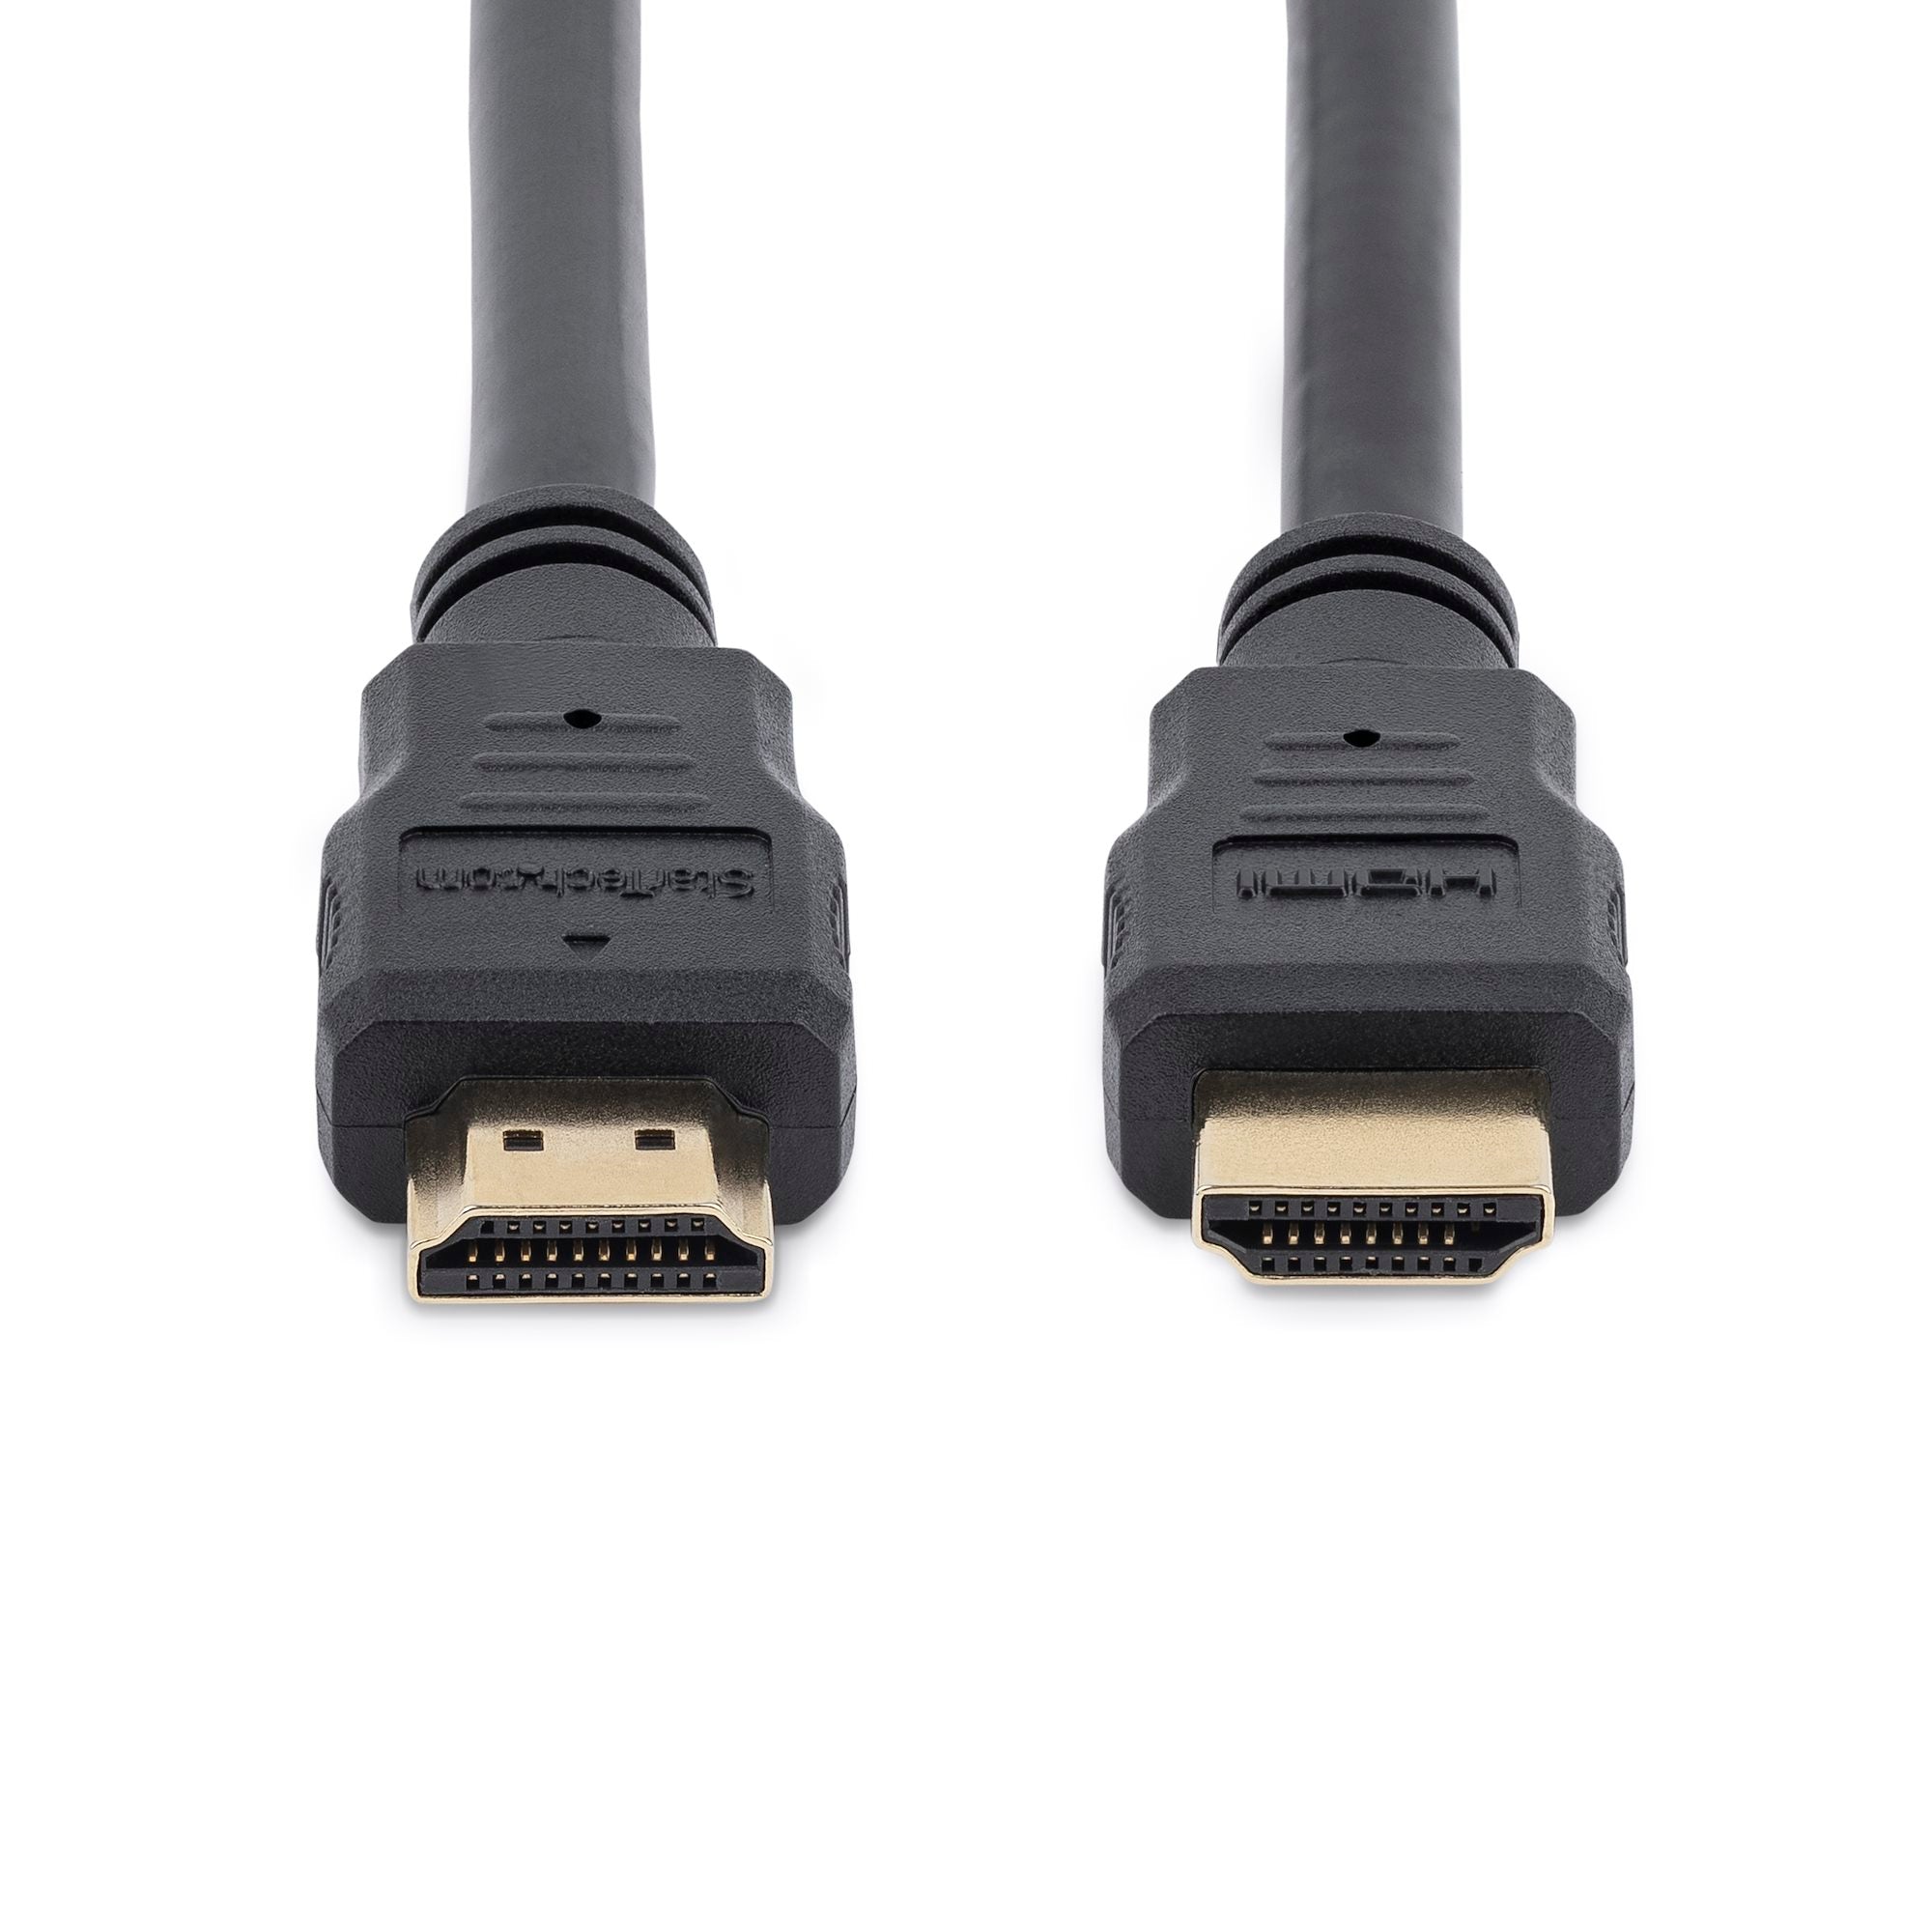 HDMI Cable 30m 4k